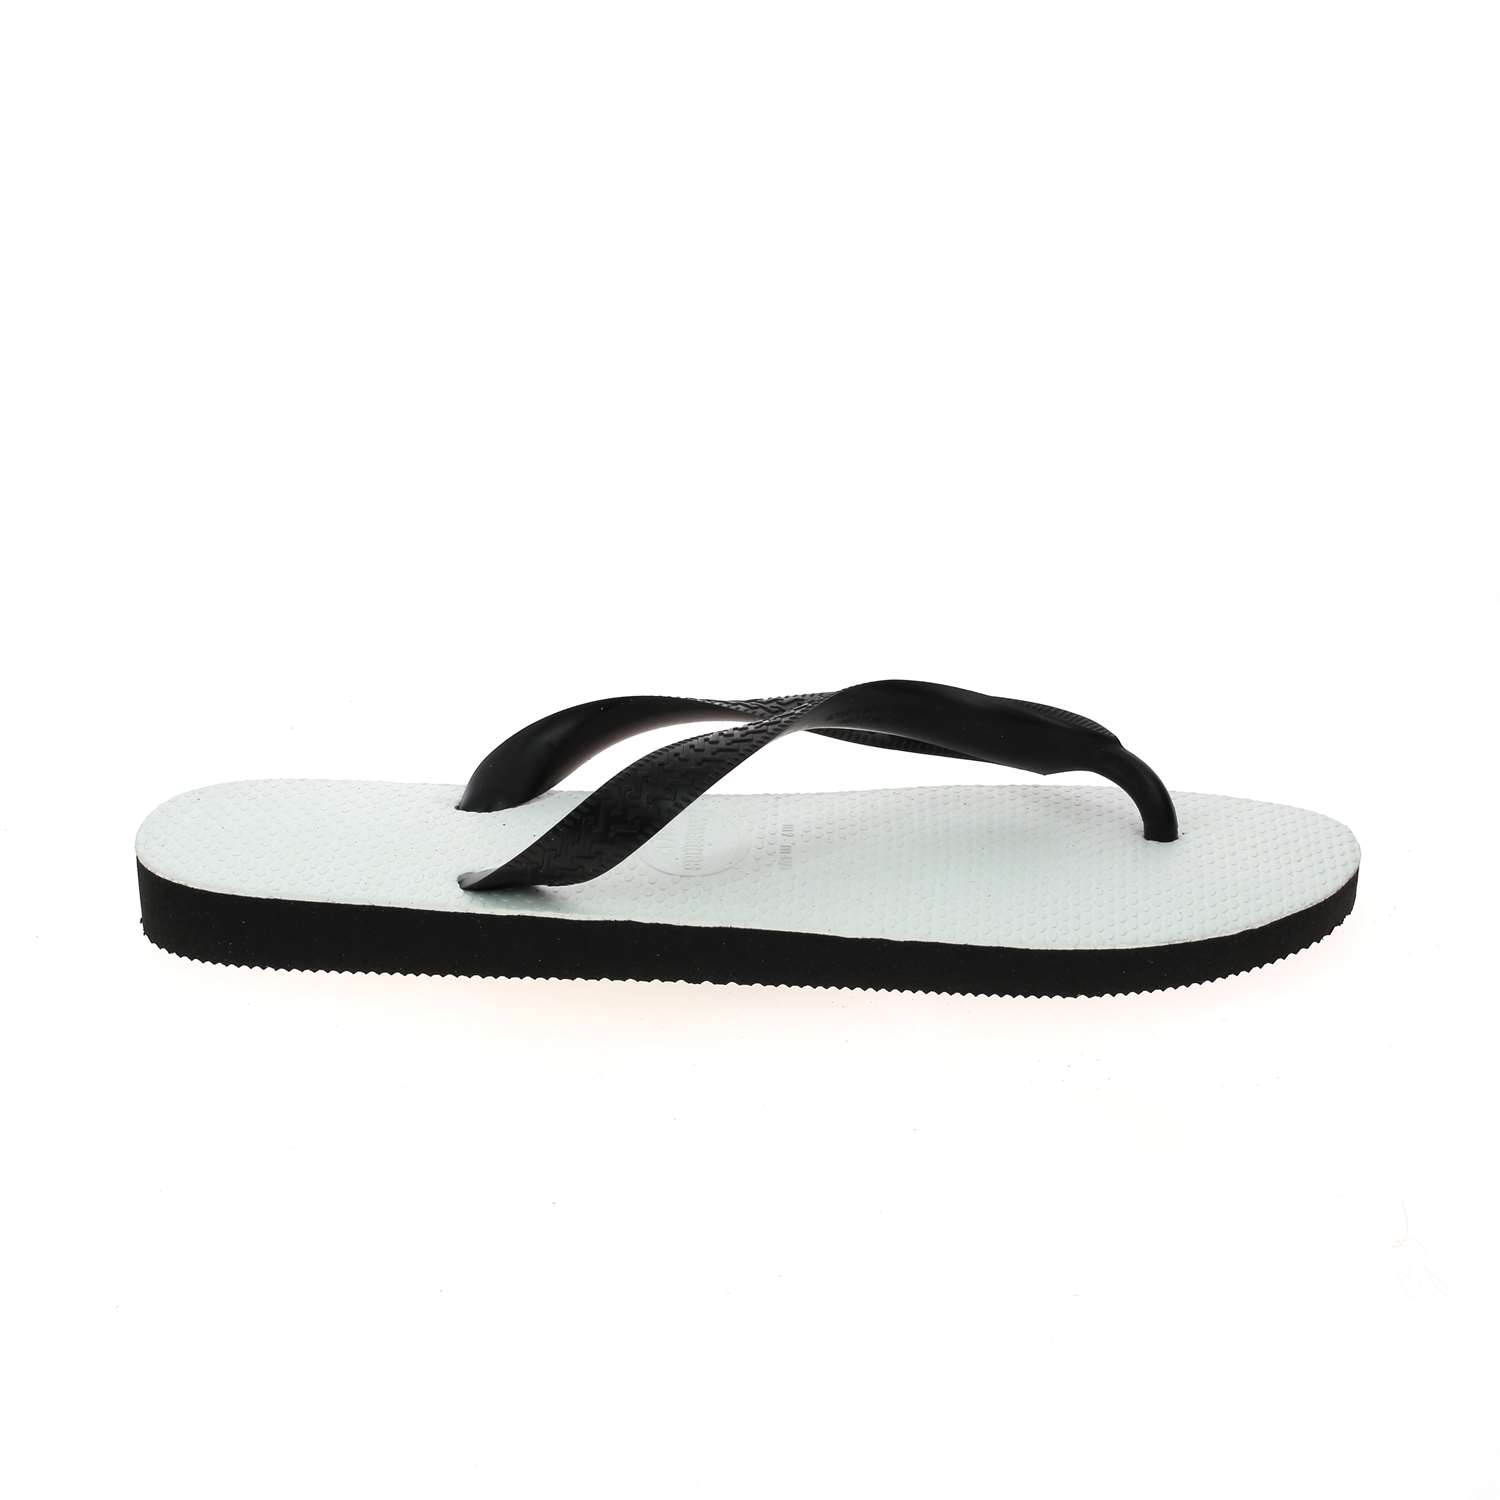 02 - TRADITIONAL - HAVAIANAS - Tongs et crocs - Synthétique